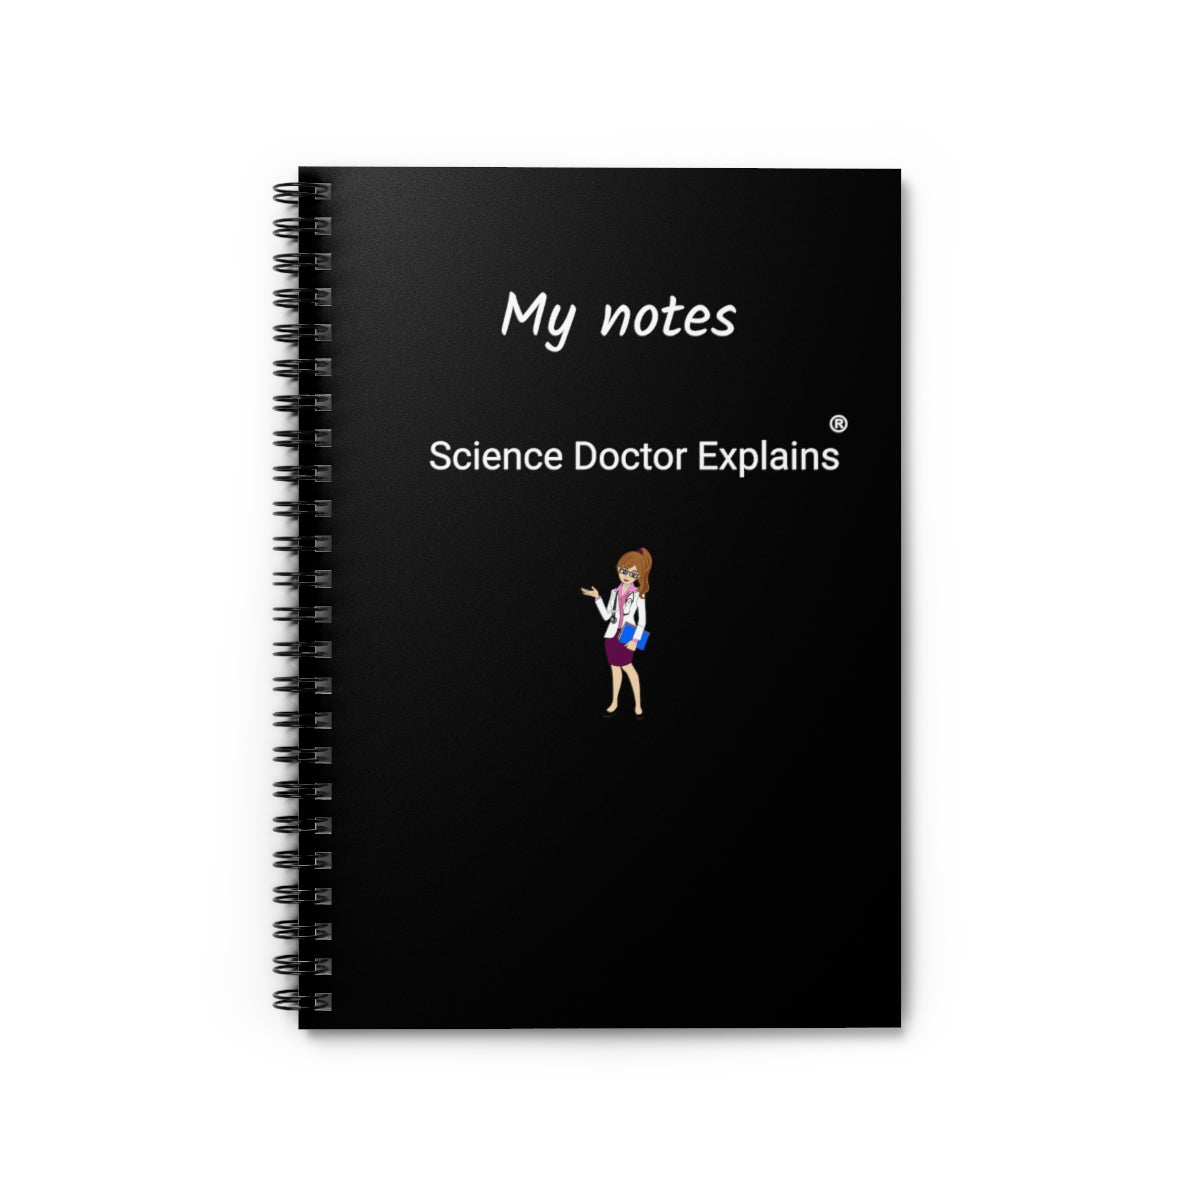 My Notes_Spiral Notebook - Ruled Line with Science Doctor Explains